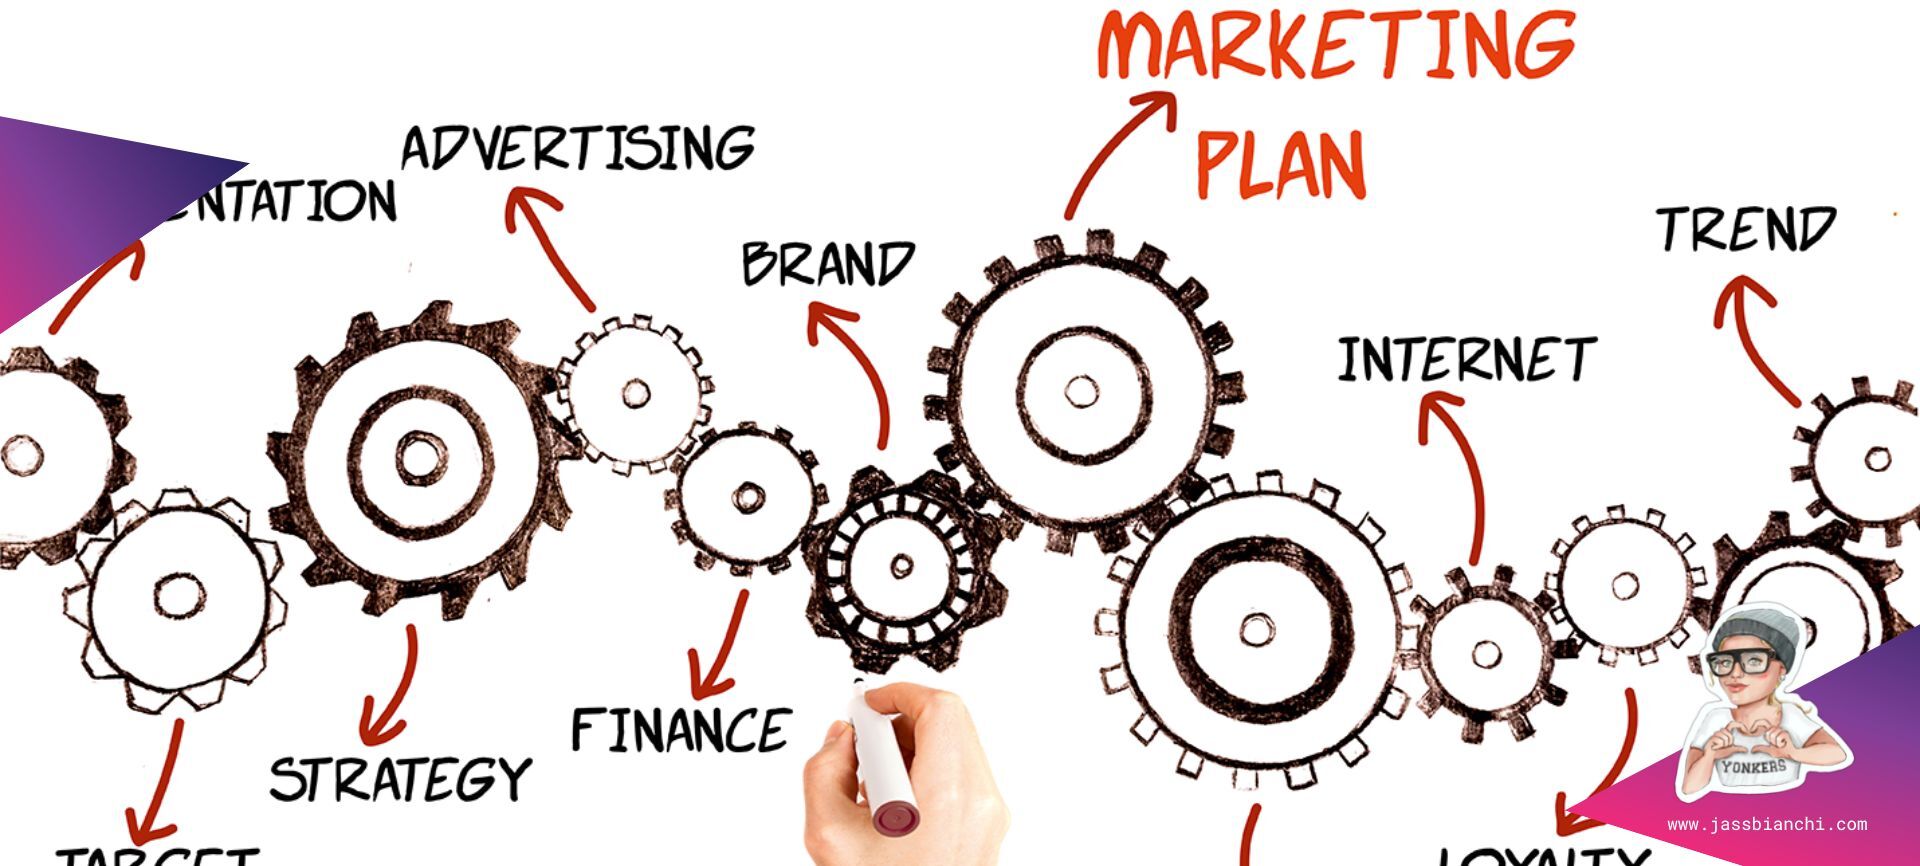 How to Develop a Marketing Plan for Your Music Career